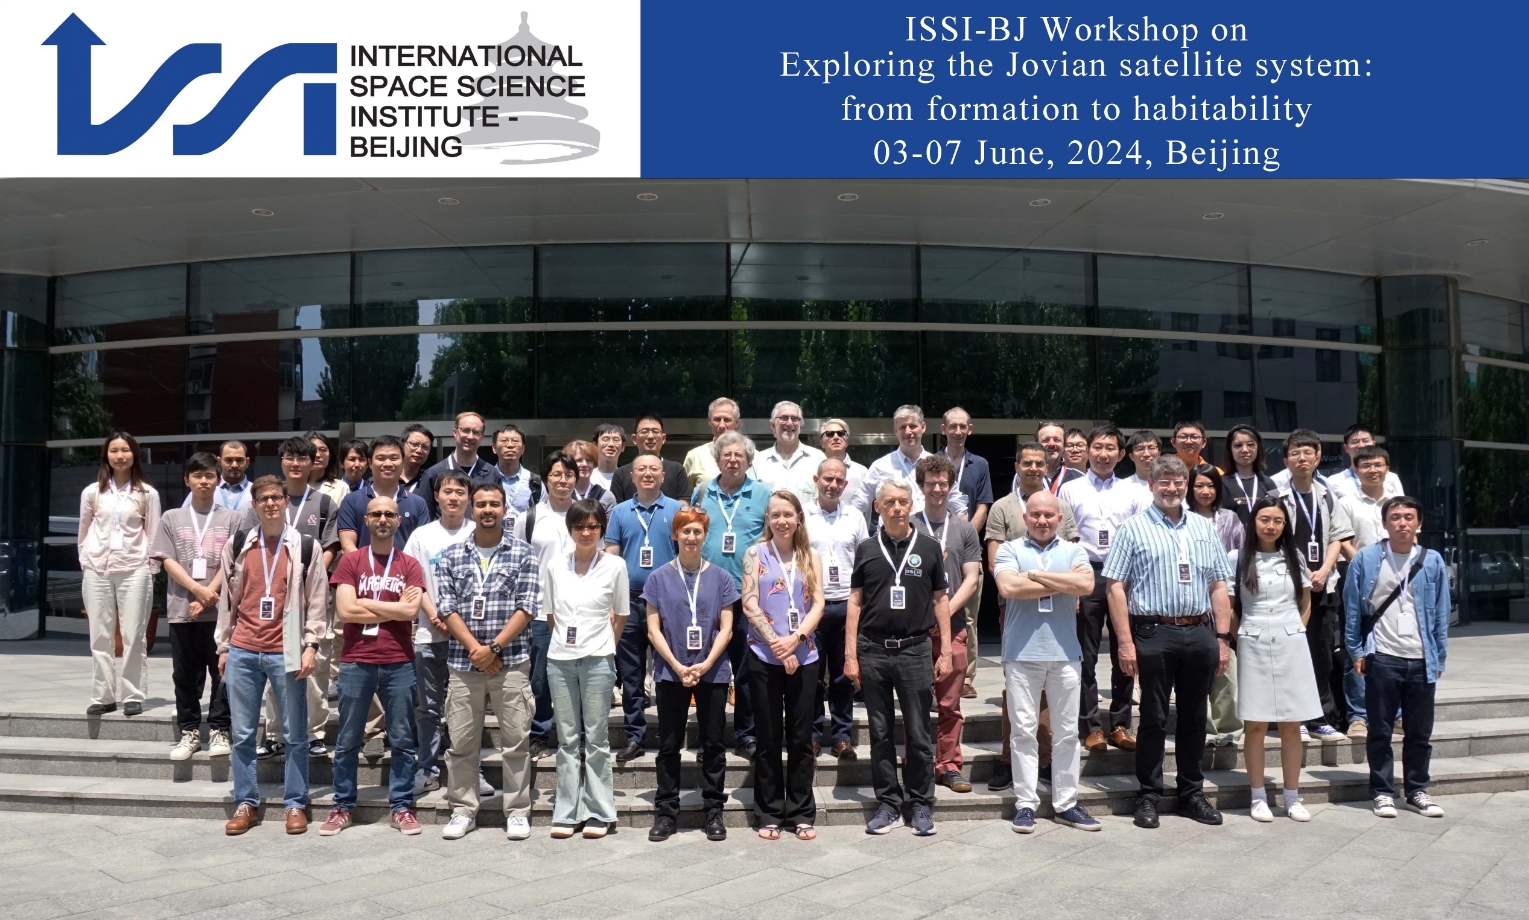 ISSI-BJ Workshop on “Exploring the Jovian satellite system: from formation to habitability” successfully held on 03-07 June 2024